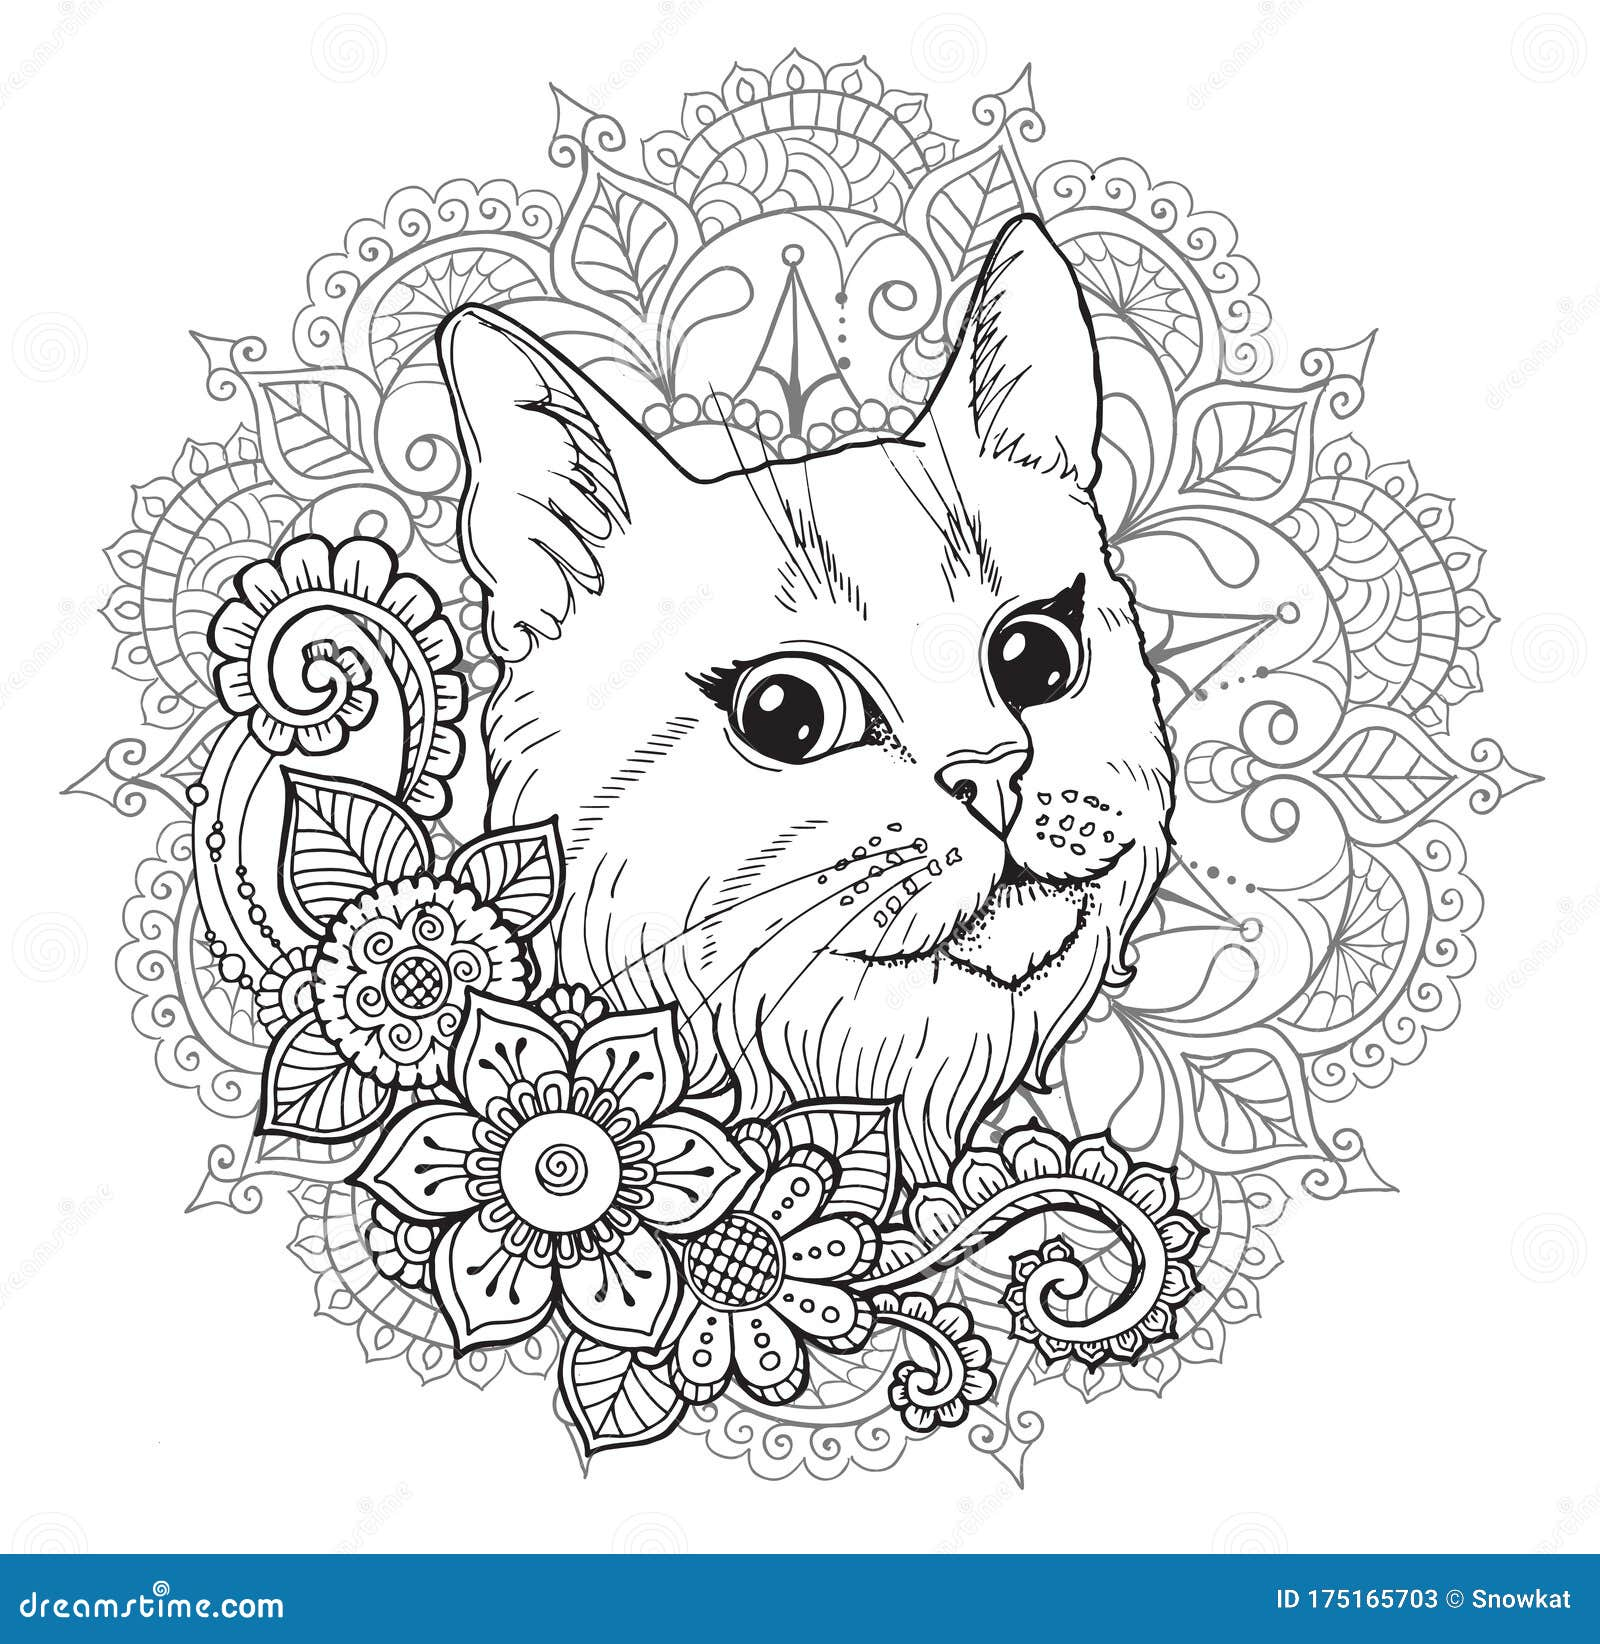 The Cat And The Mandala. Coloring Book. Stock Illustration intérieur Mandala Chat